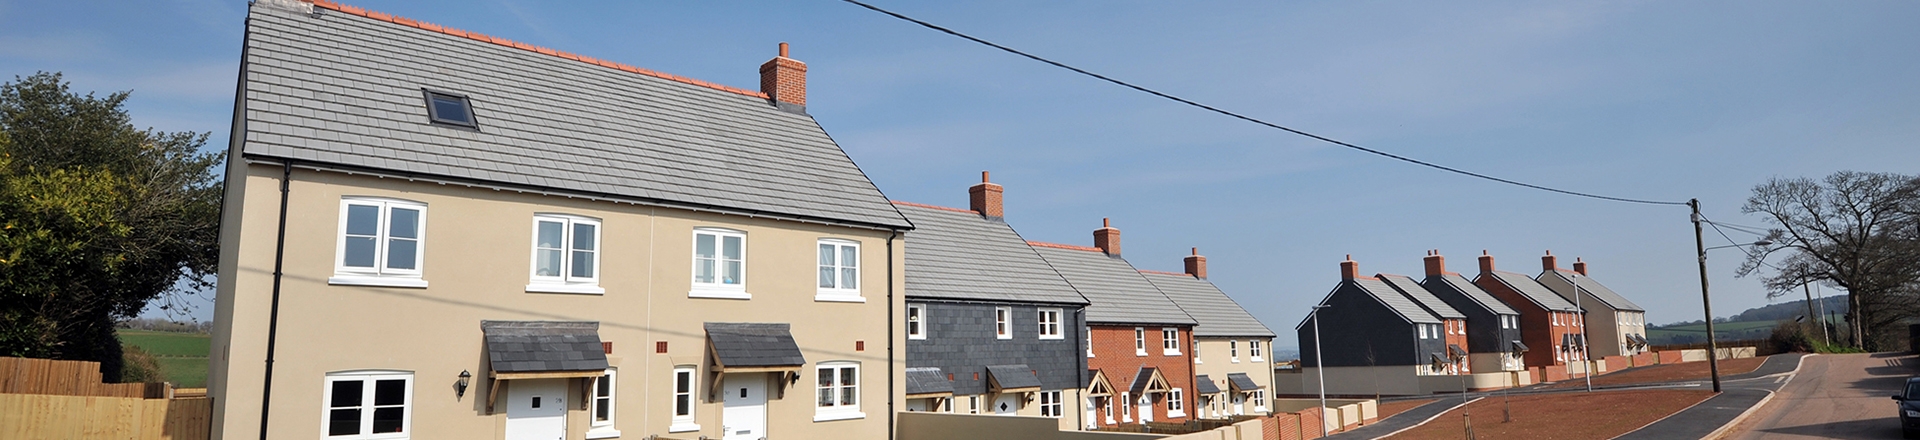 Homes in Bradninch Exeter